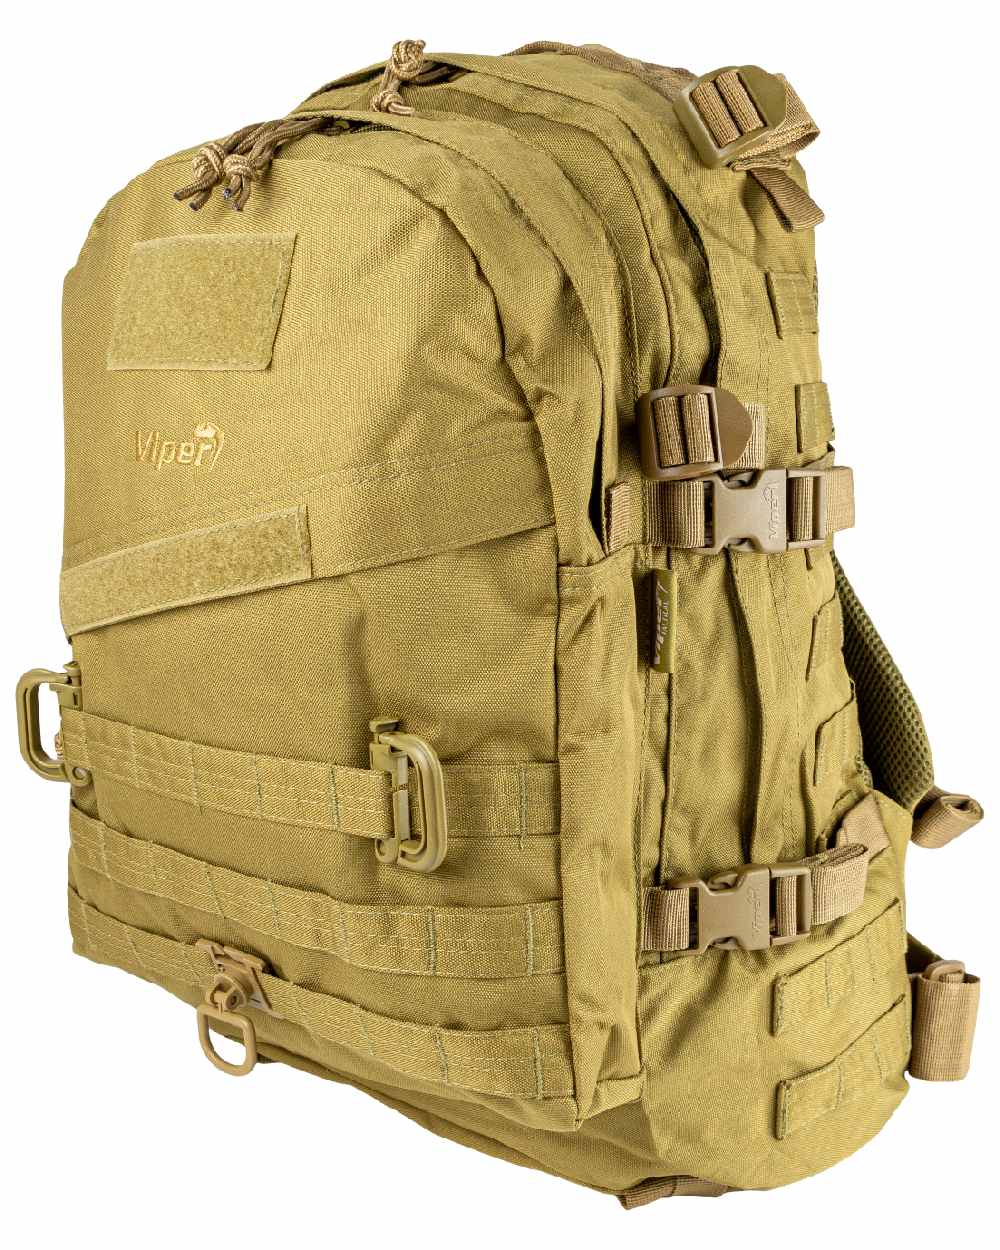 Viper Special Ops Pack in Coyote 